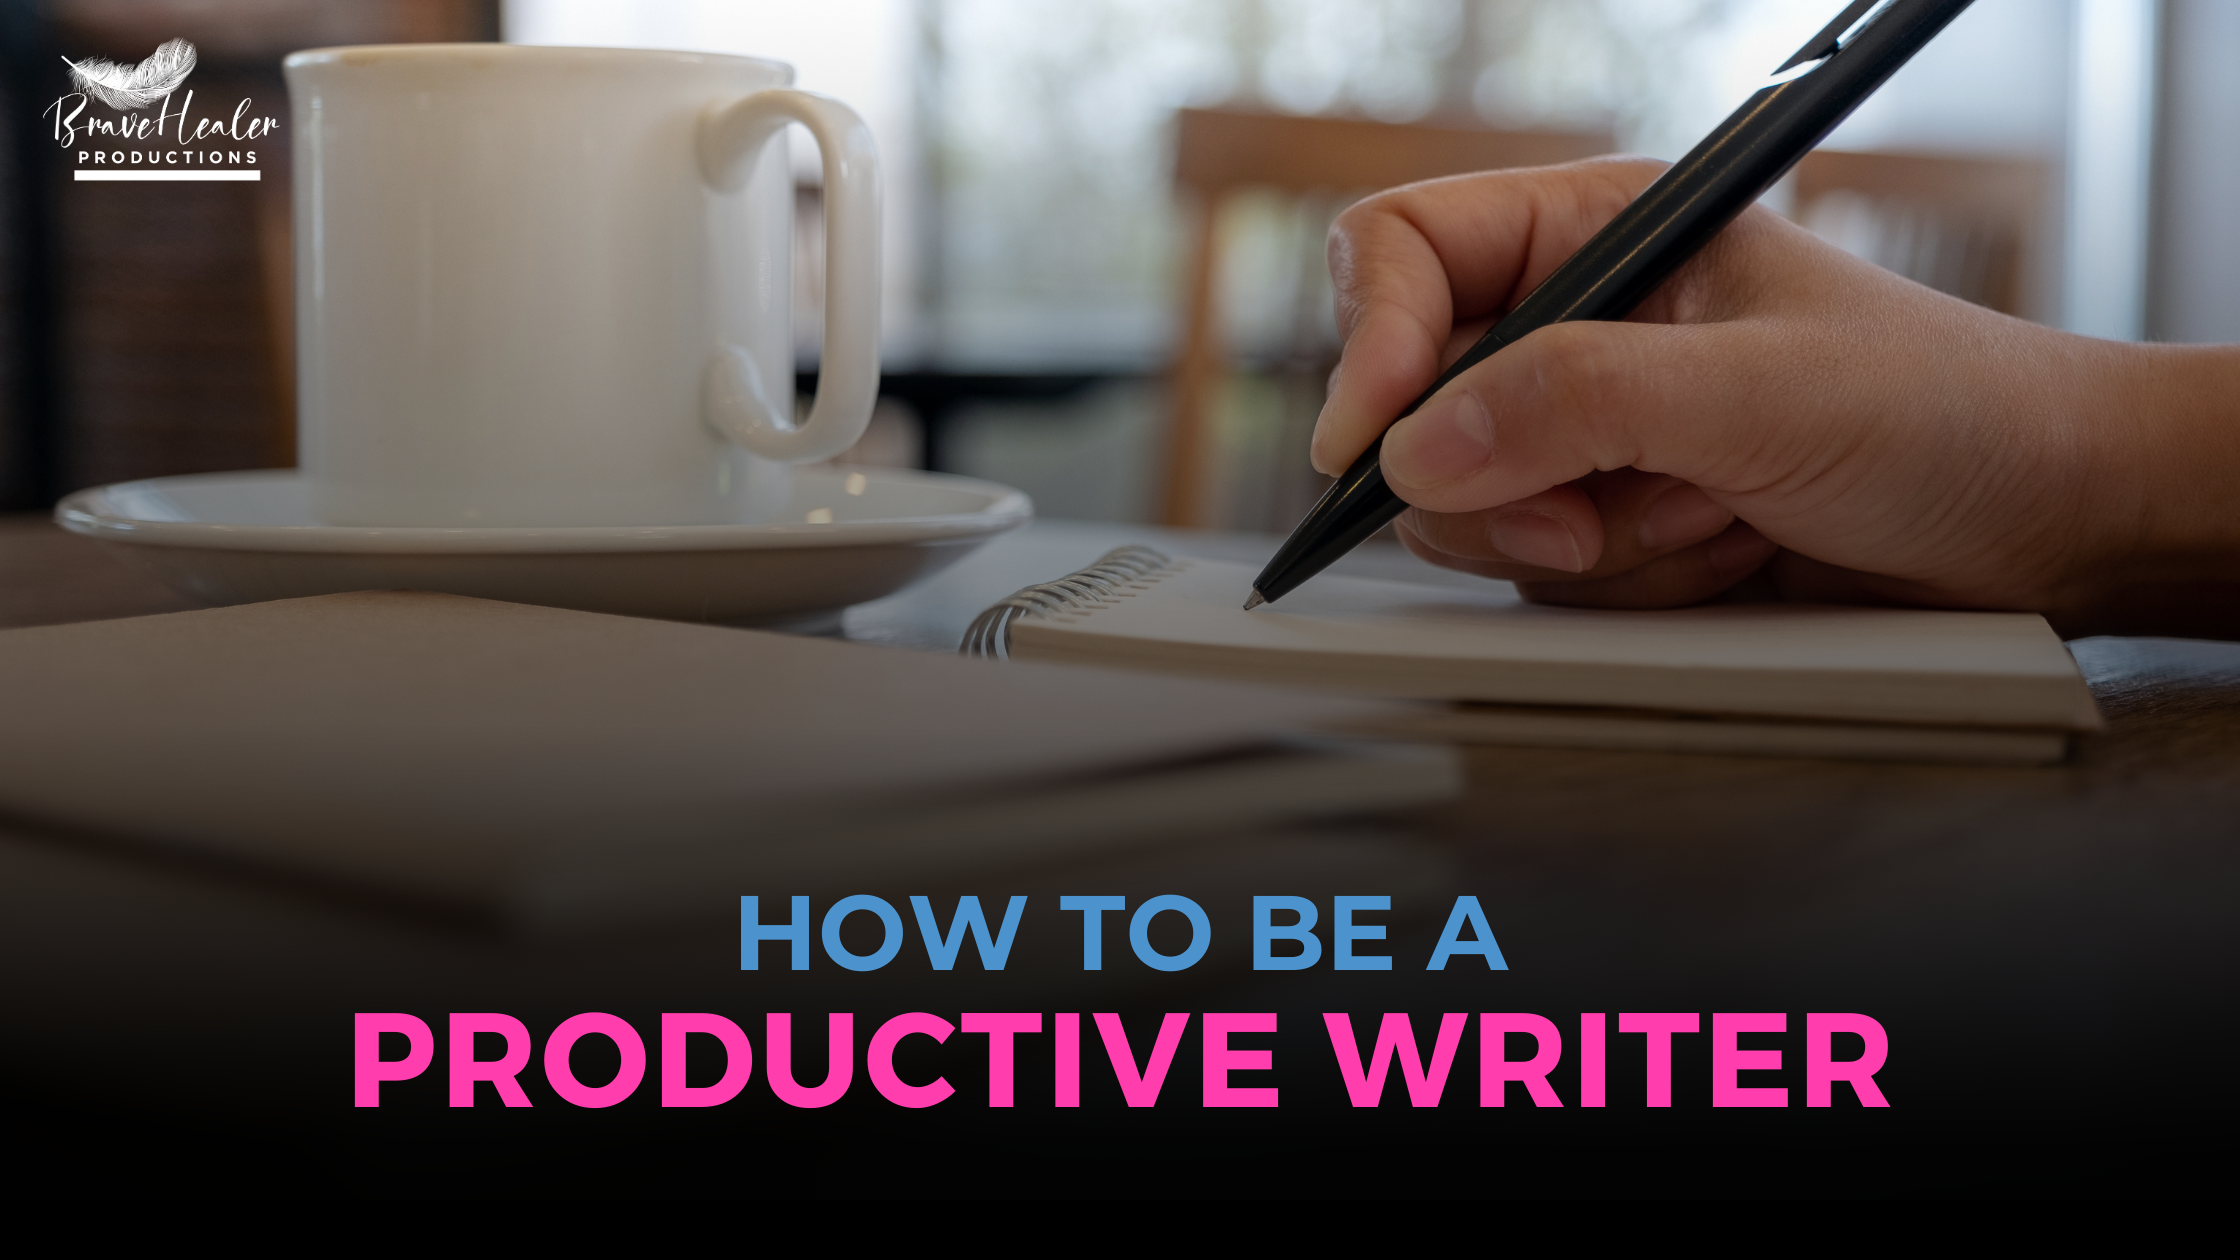 10-easy-ways-to-be-a-more-productive-writer